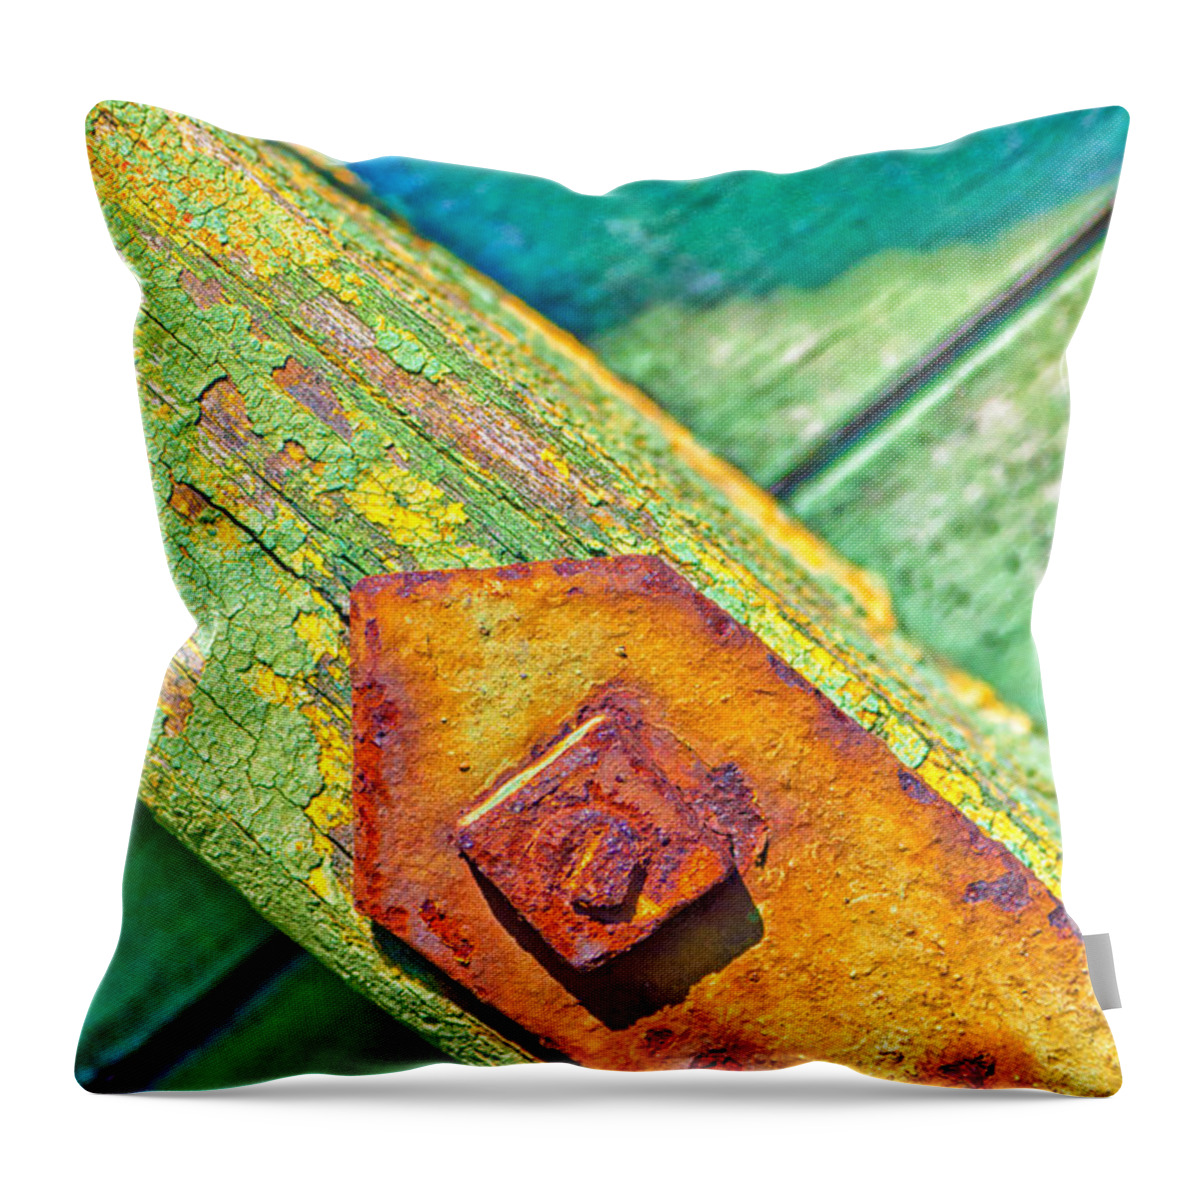 Abstract Throw Pillow featuring the photograph Rusty bolt on rotten green wood by Silvia Ganora